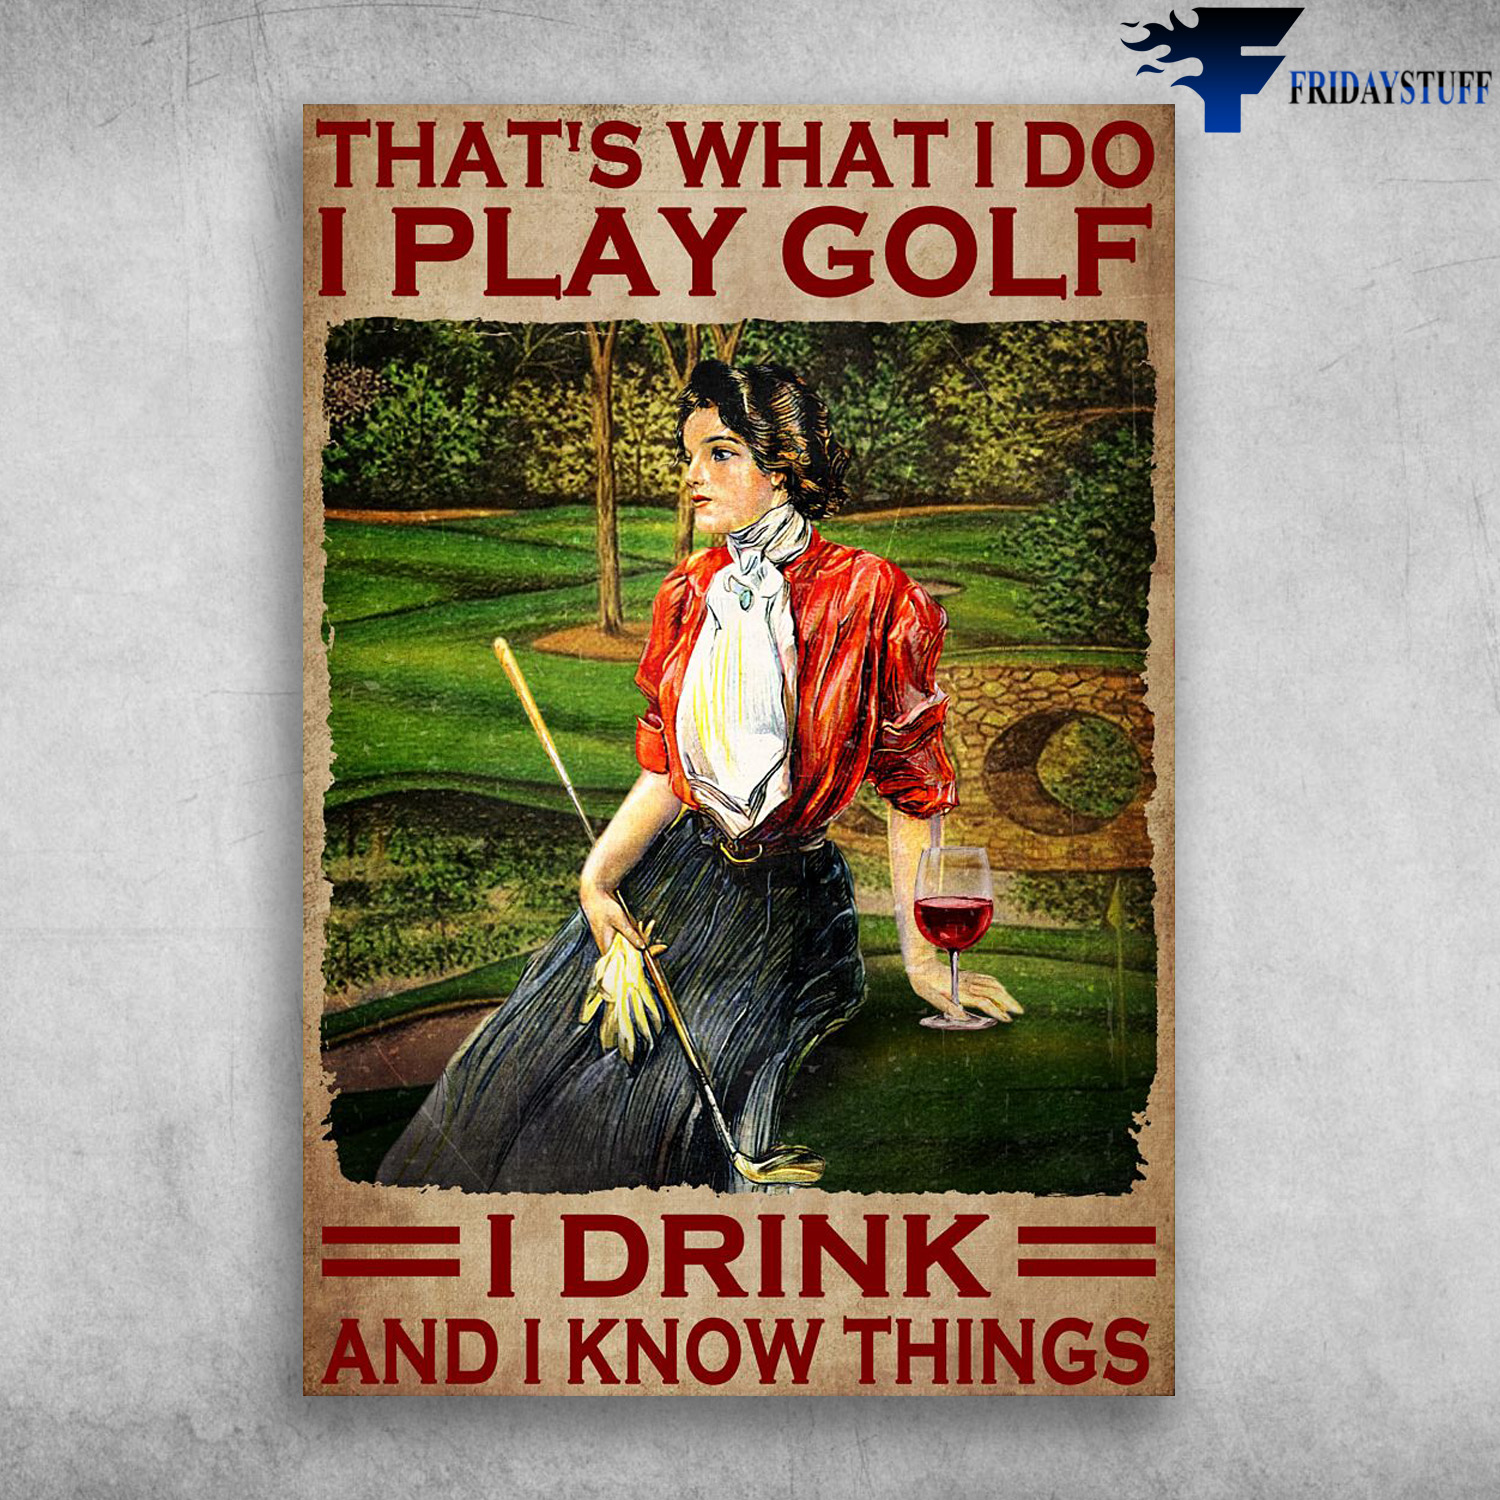 Girl Loves Golf And Wine - That's What I Do, I Play Golf, I Drink, And I Knowthings